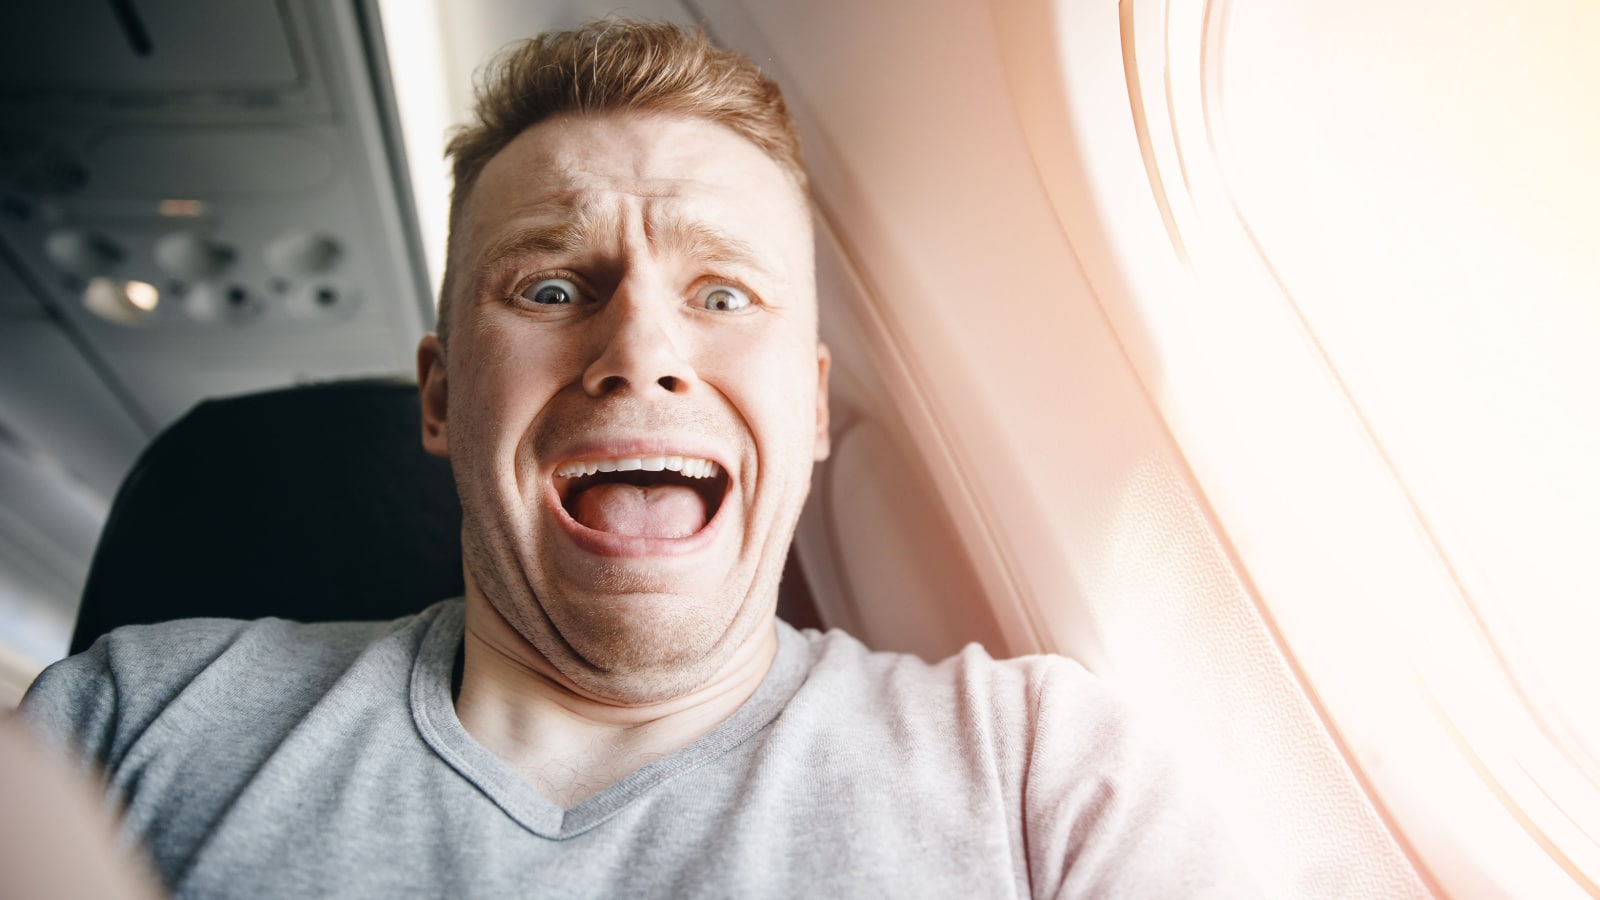 Male passenger in plane screams and cries, aerophobia. background of porthole. Concept fear of flying on airplane.